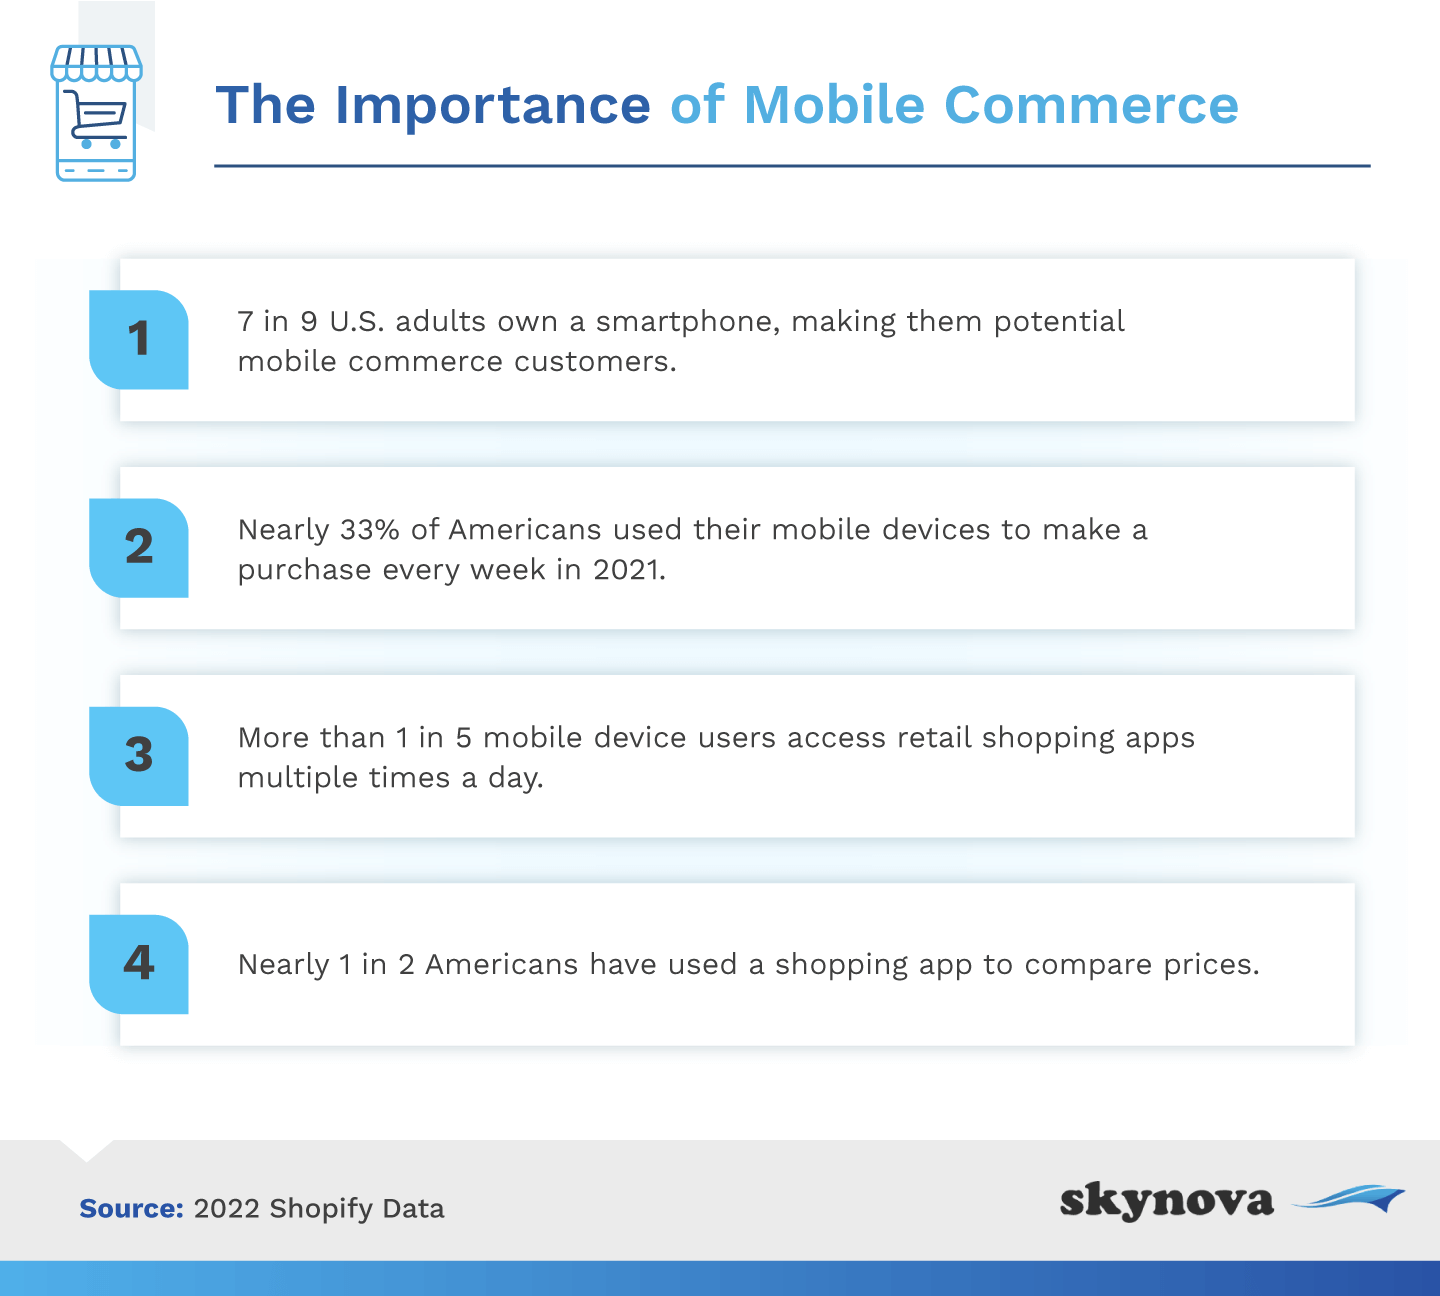 The importance of mobile commerce for startups